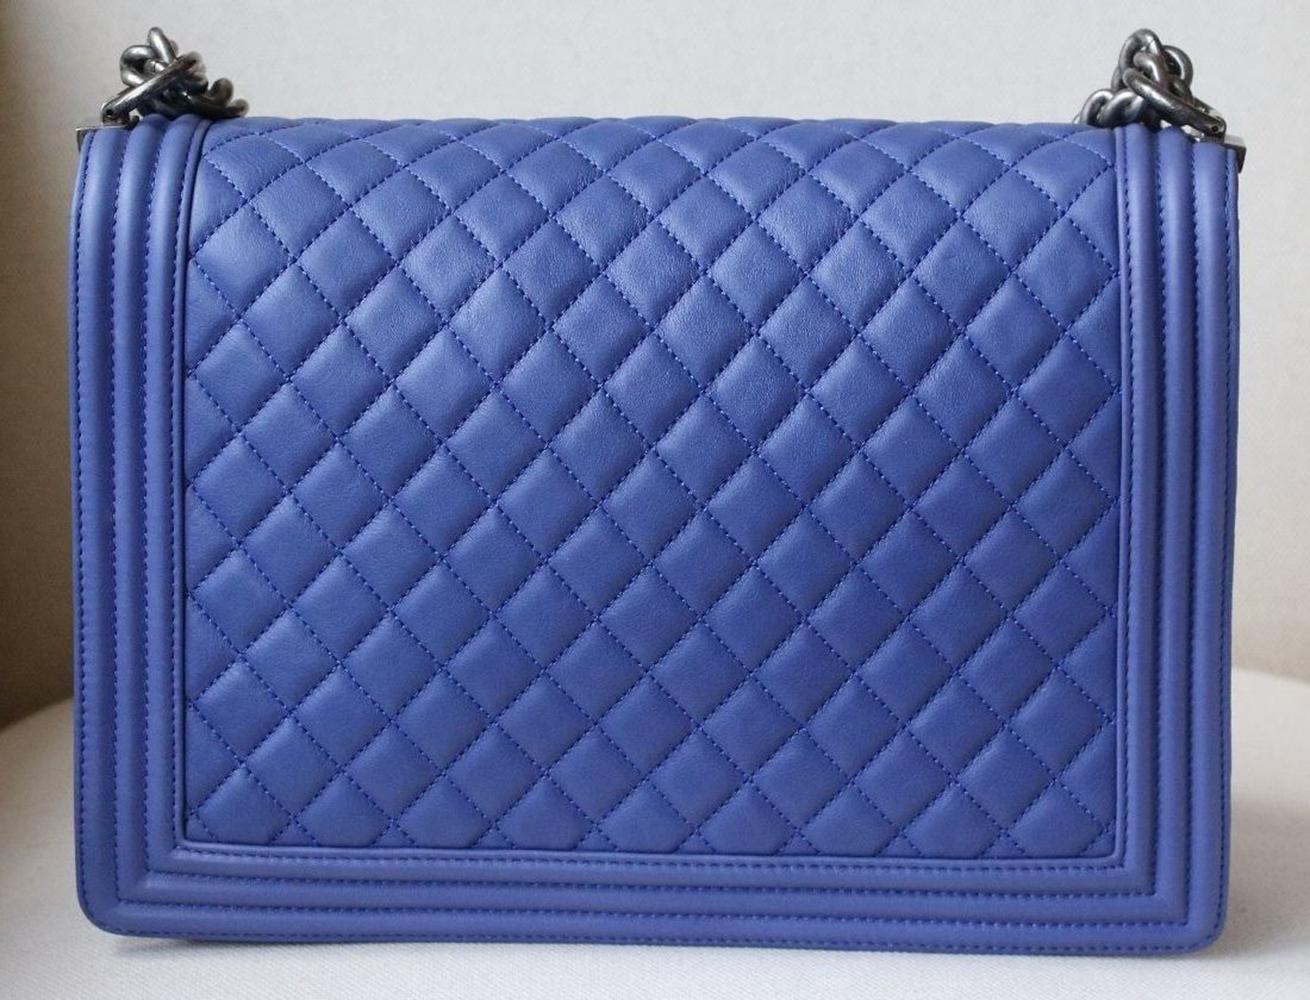 This Chanel Boy Large Flap bag in grained calfskin quilted leather features a signature double CC push lock closure, as well as signature chain and leather straps. Gunmetal hardware.

Dimensions: Approx. 21 cm x 30 cm x 8 cm

Condition: Barely used.